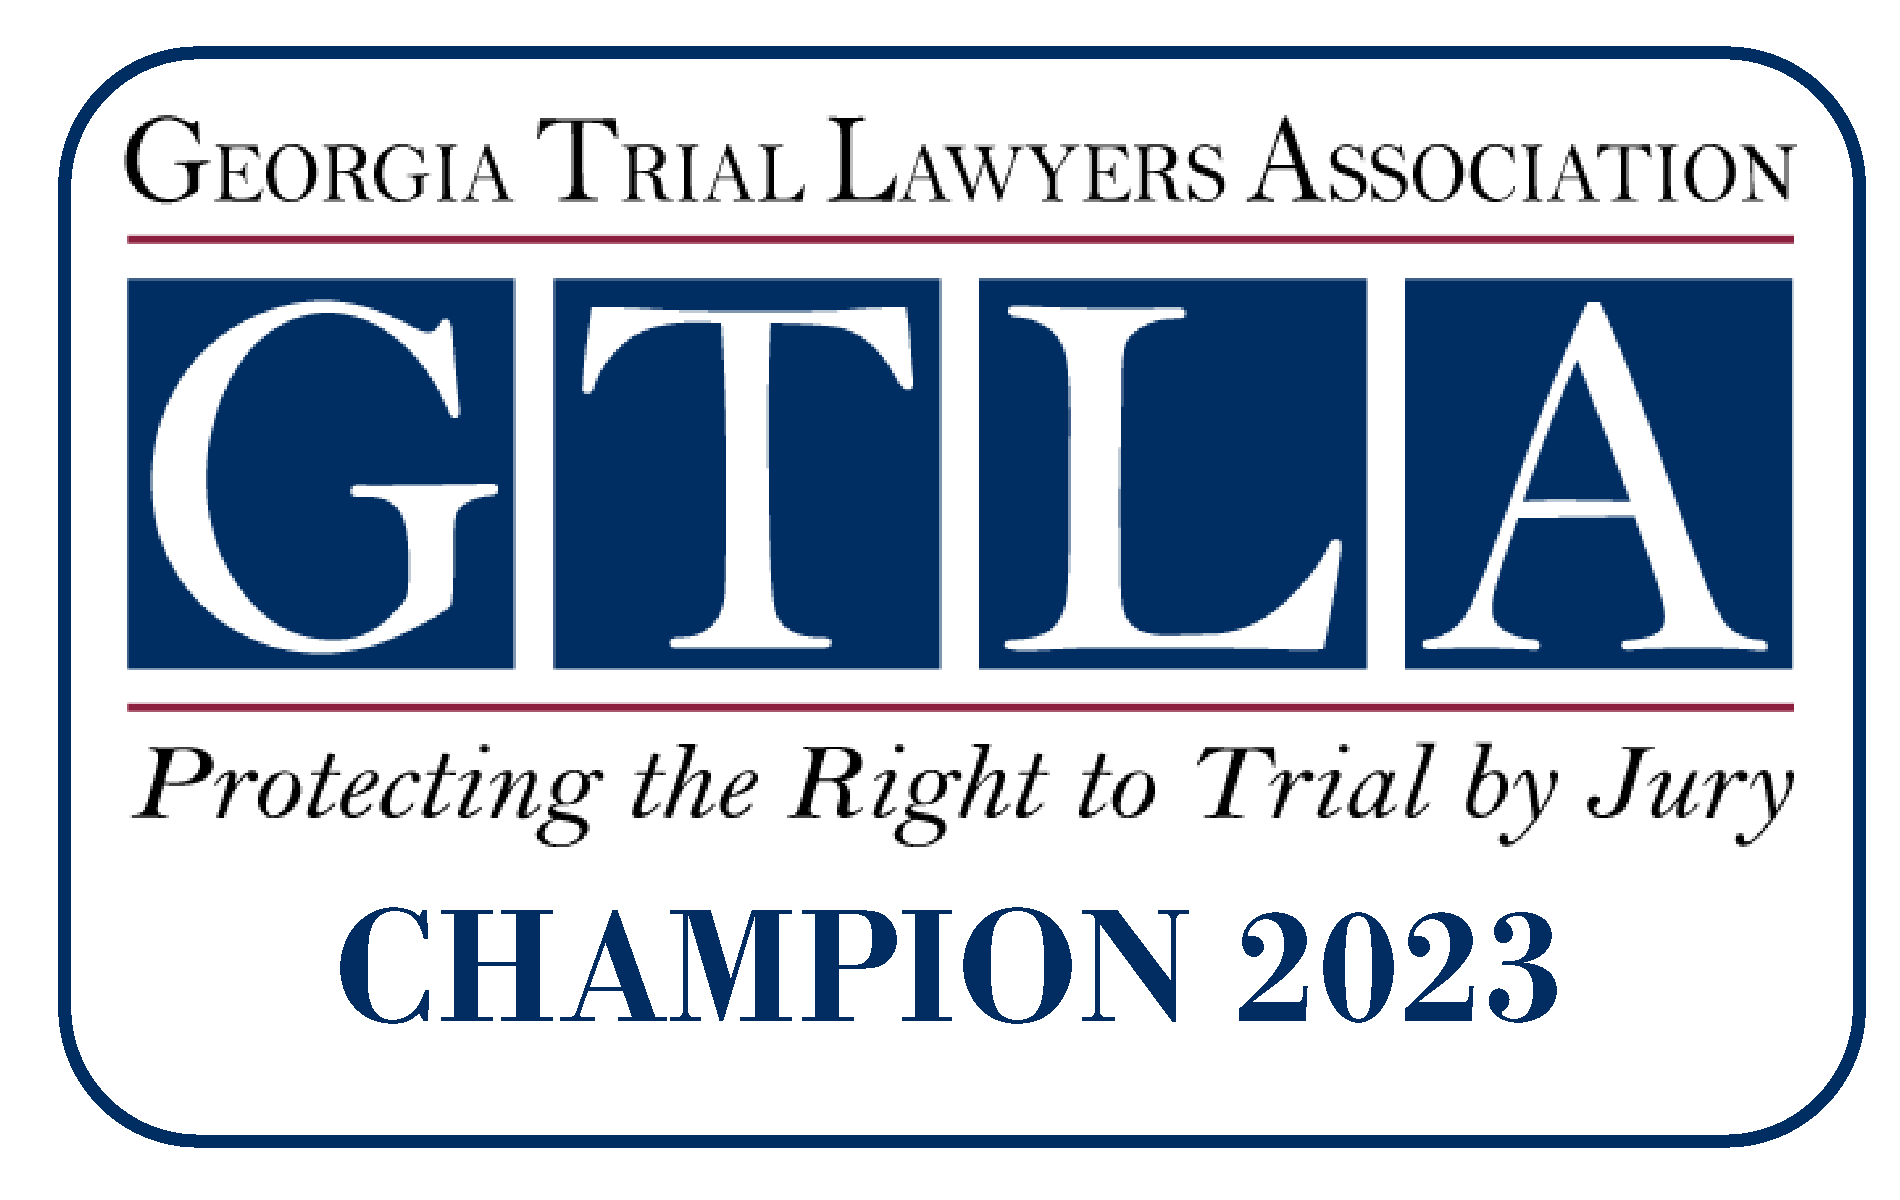 Georgia Trial Lawyers Association | GTLA | Protecting the Right to Trial by Jury | CHAMPION 2023